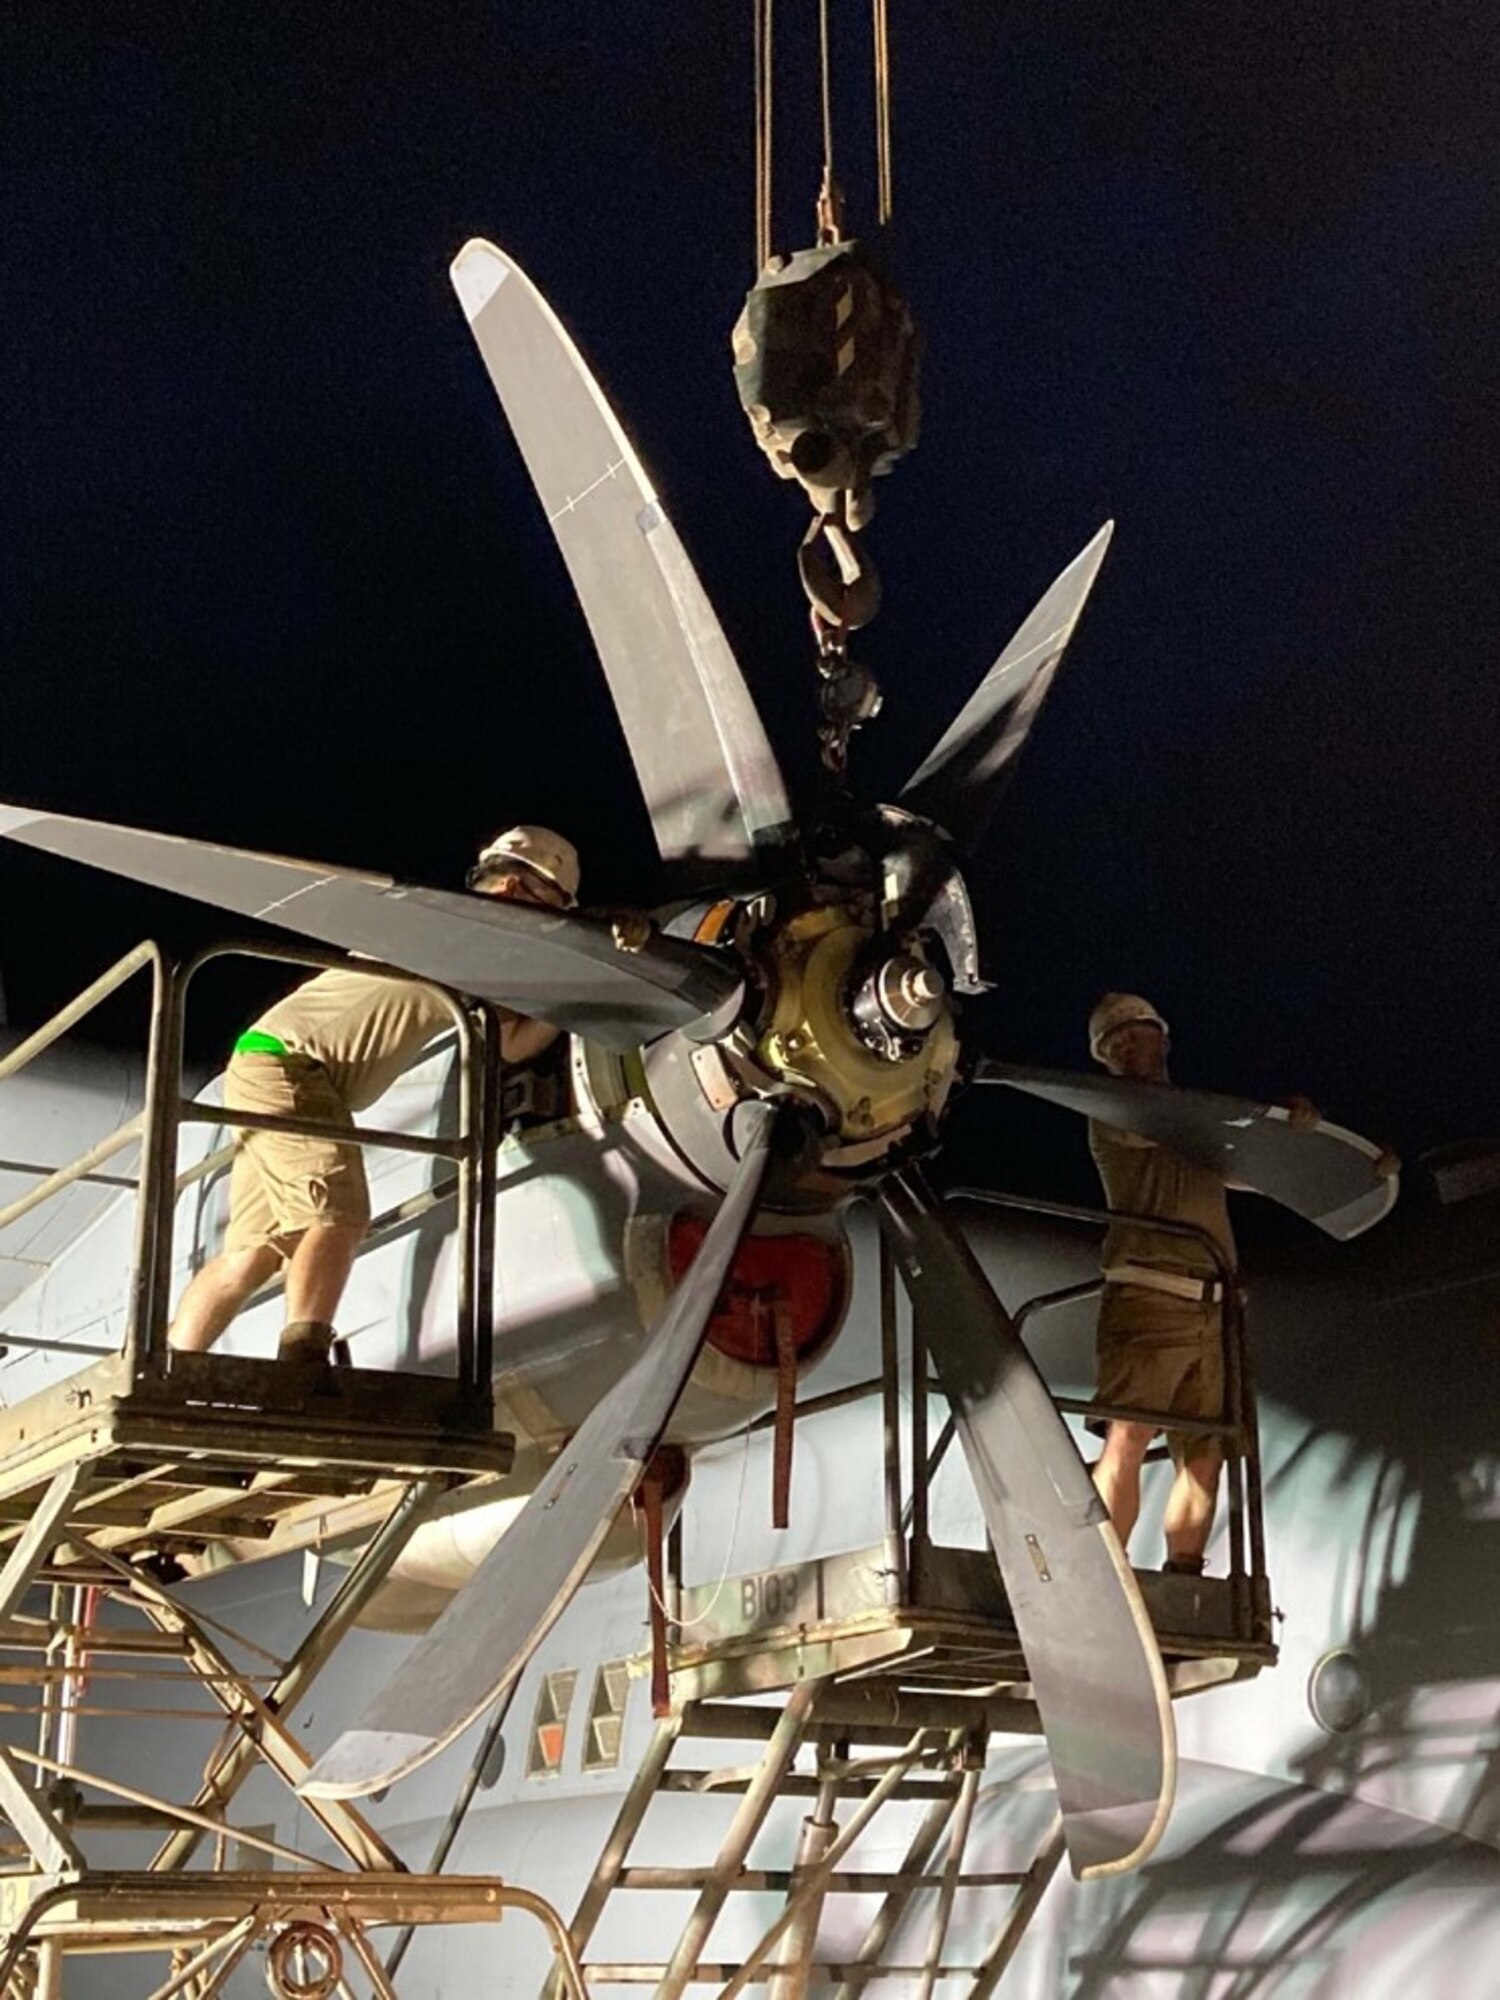 Maintainers fix a propeller on a plane